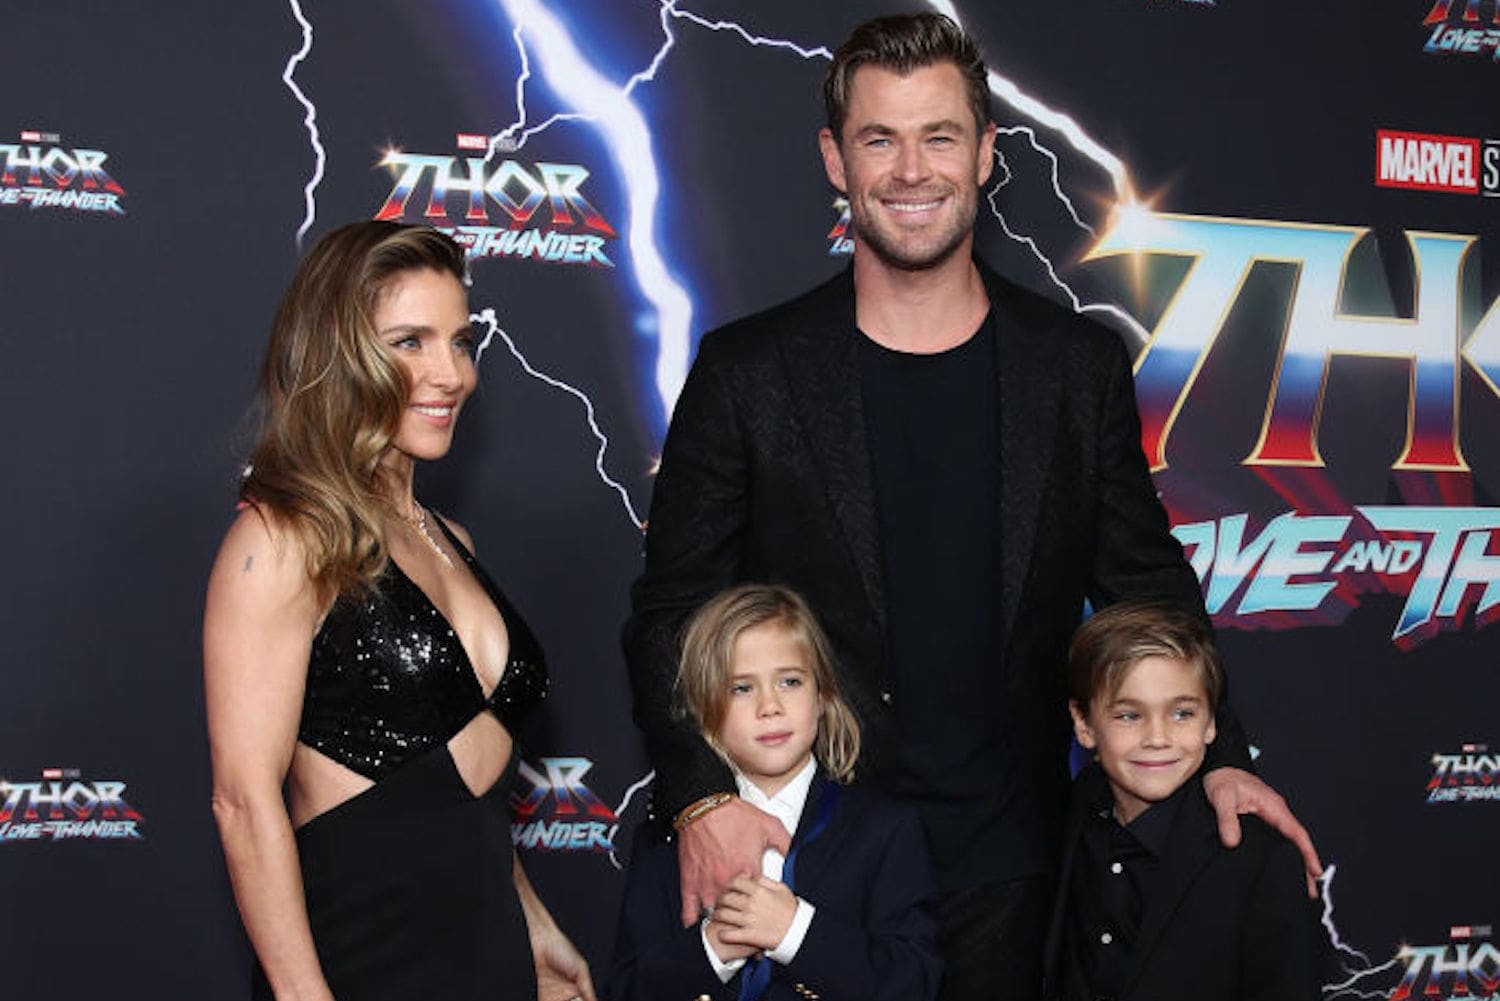 Chris Hemsworth And Taika Waititi's Children Made The Monsters For Thor: Love and Thunder